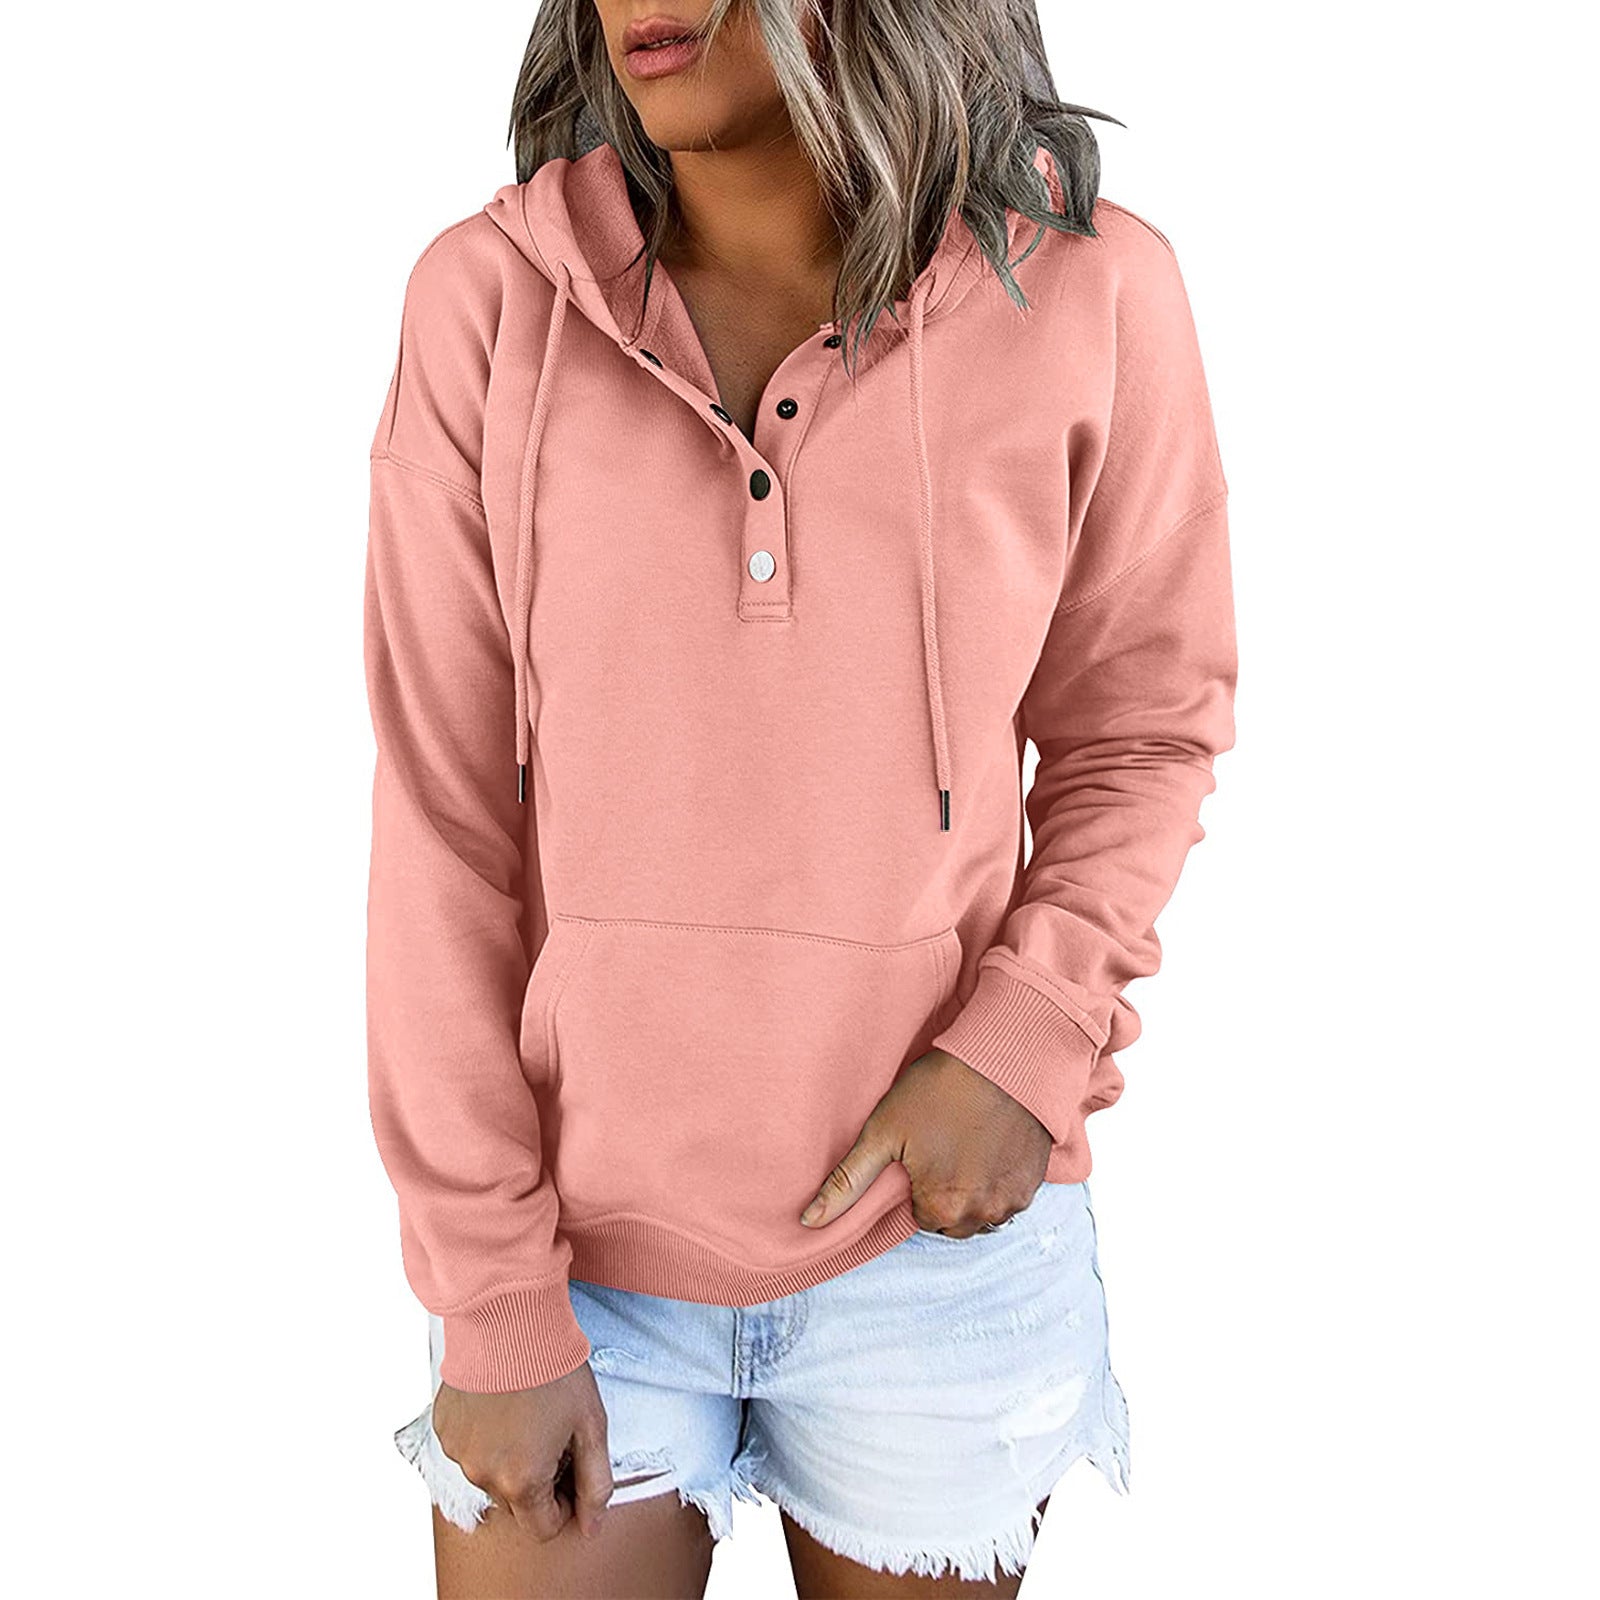 Women's Long-sleeved Hooded Front Eyelet Sweater - Beuti-Ful